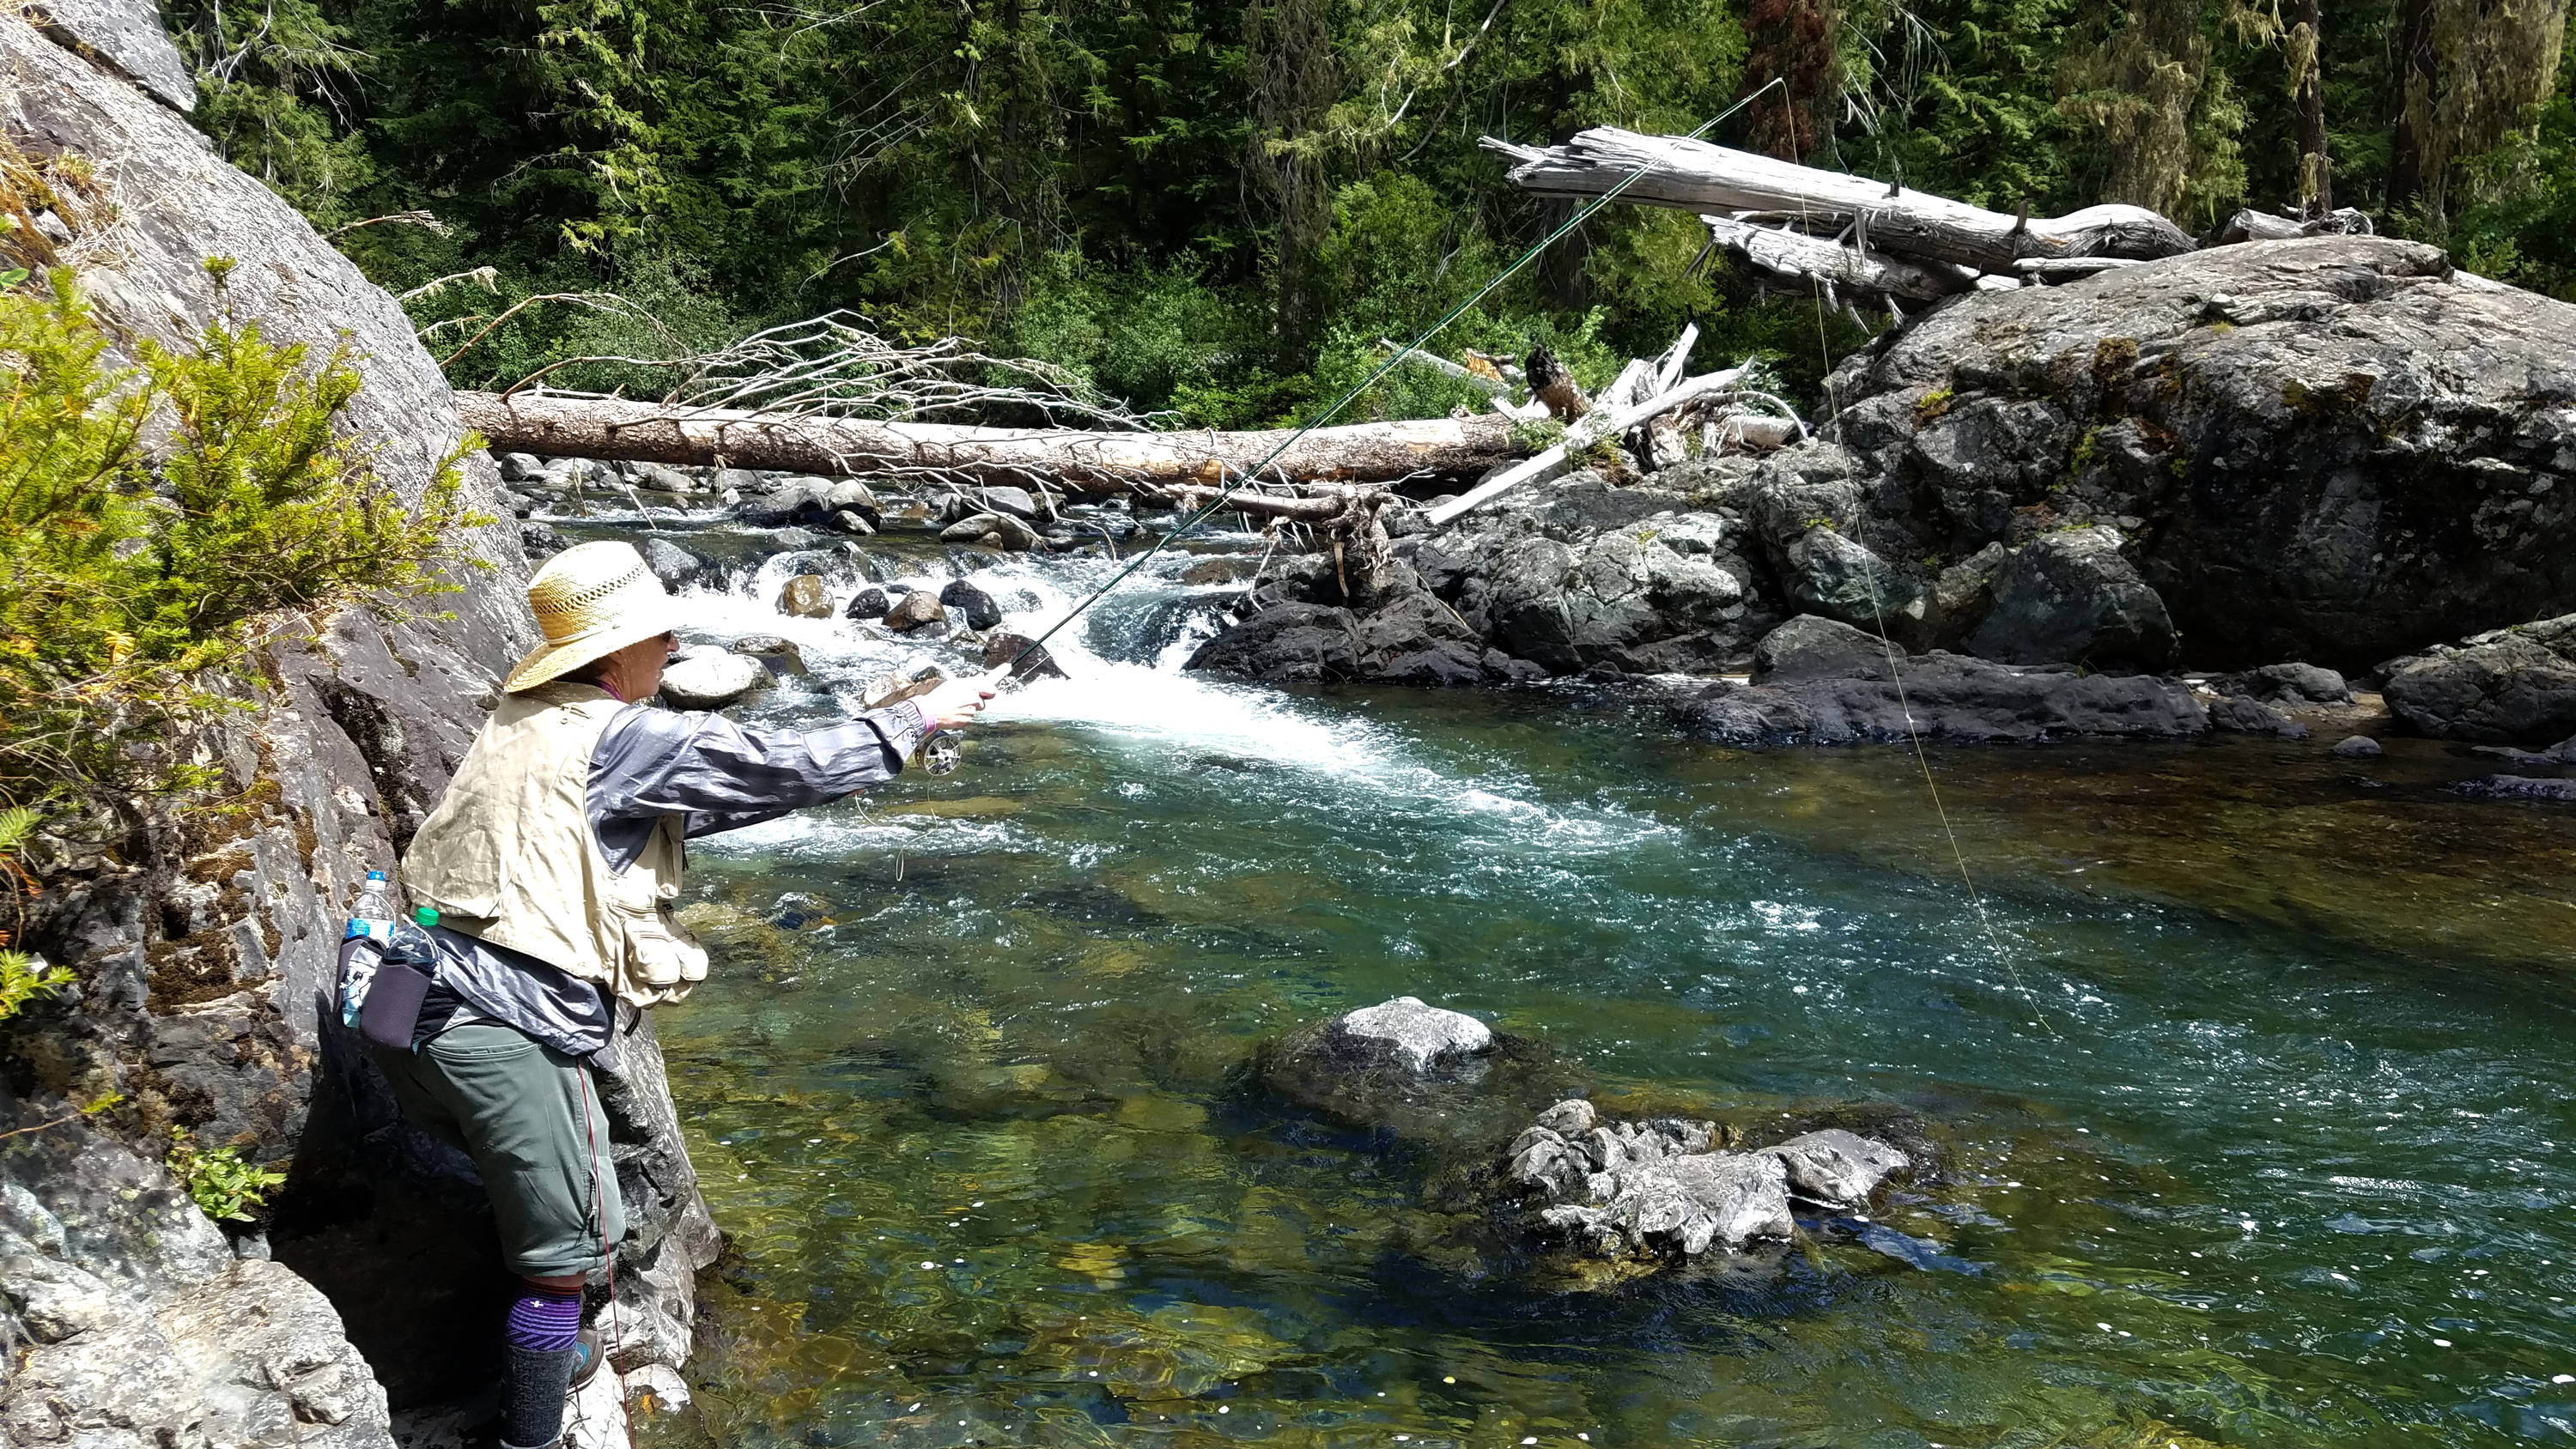 Wade Fishing on the Cle Elum River